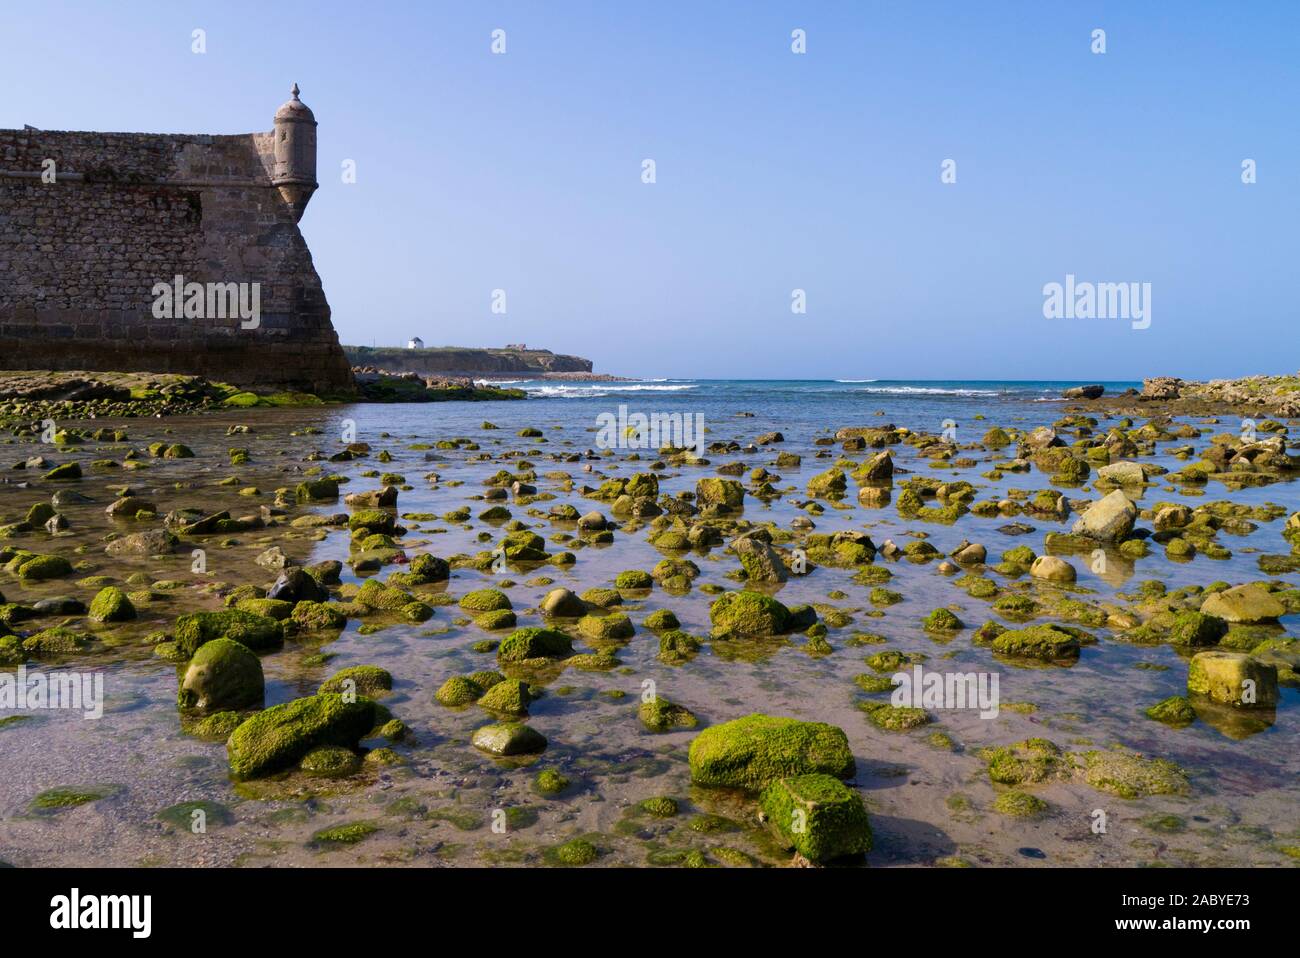 The old city walls of Peniche Portugal Stock Photo